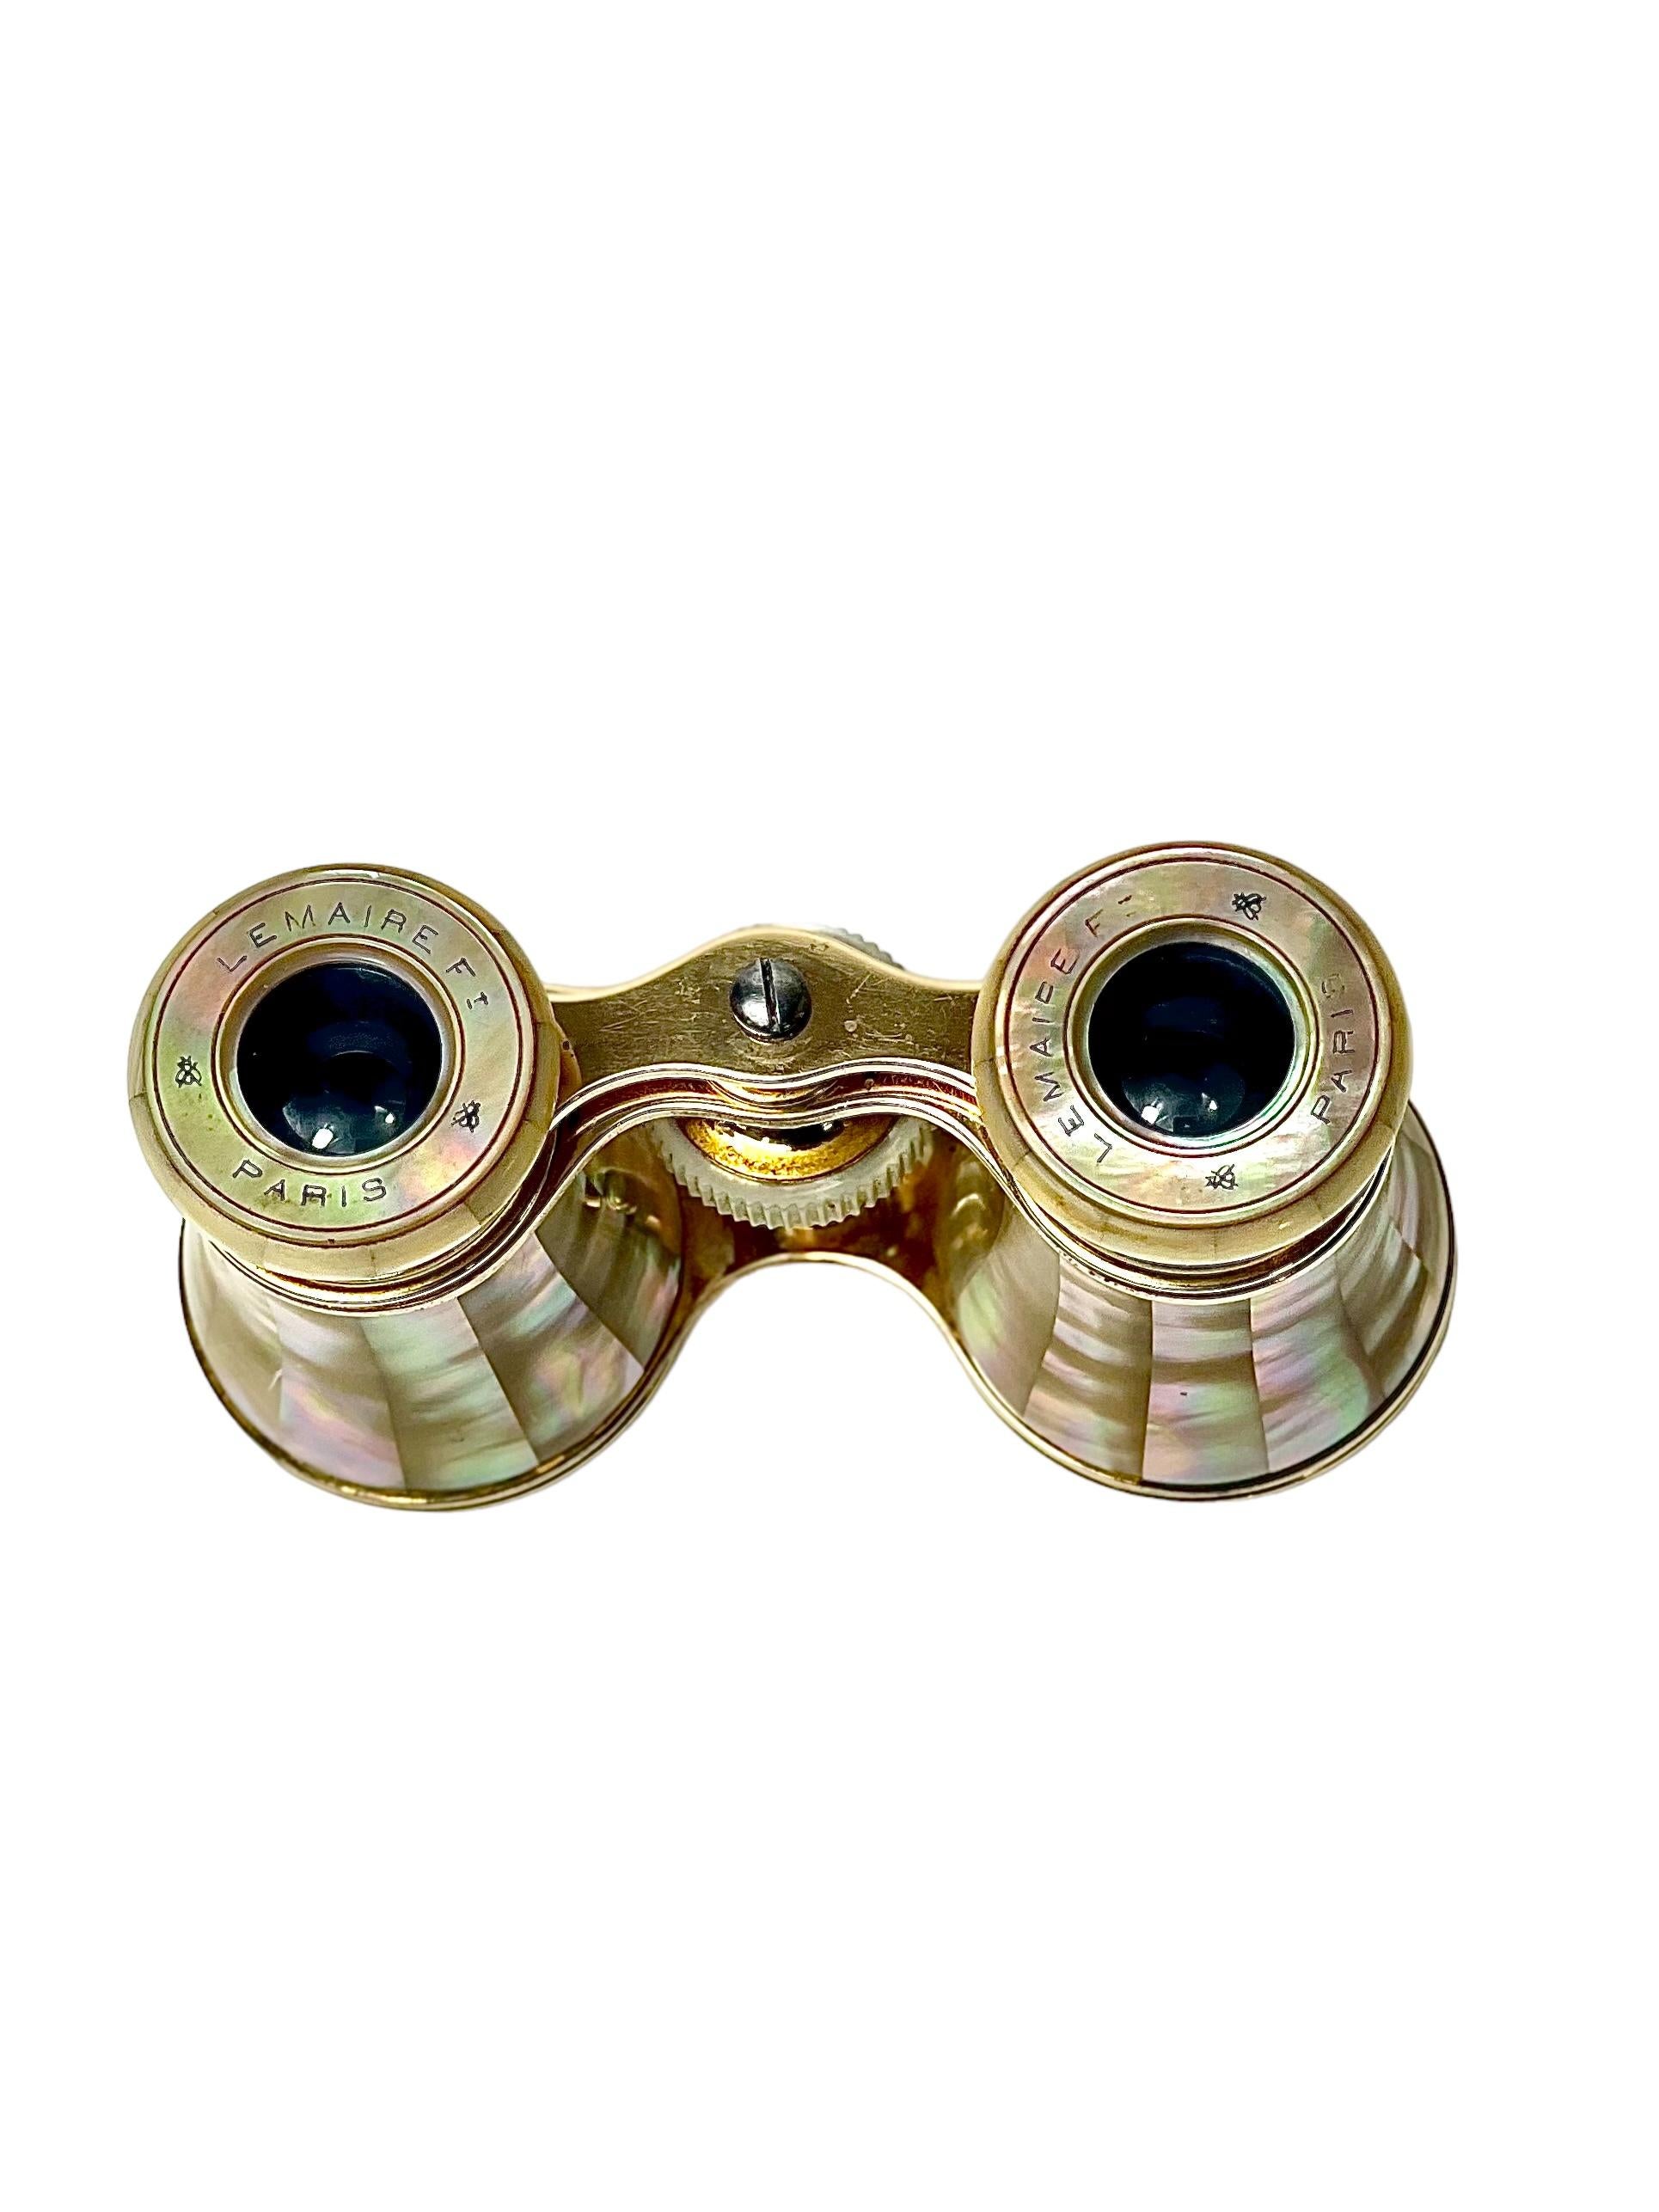 A beautiful pair of miniature binoculars, or opera glasses, crafted from brass and clad in iridescent mother of pearl inlaid panels. Dating from the late 19th century, these were made by renowned craftsman Jacques LeMaire, who is credited with the